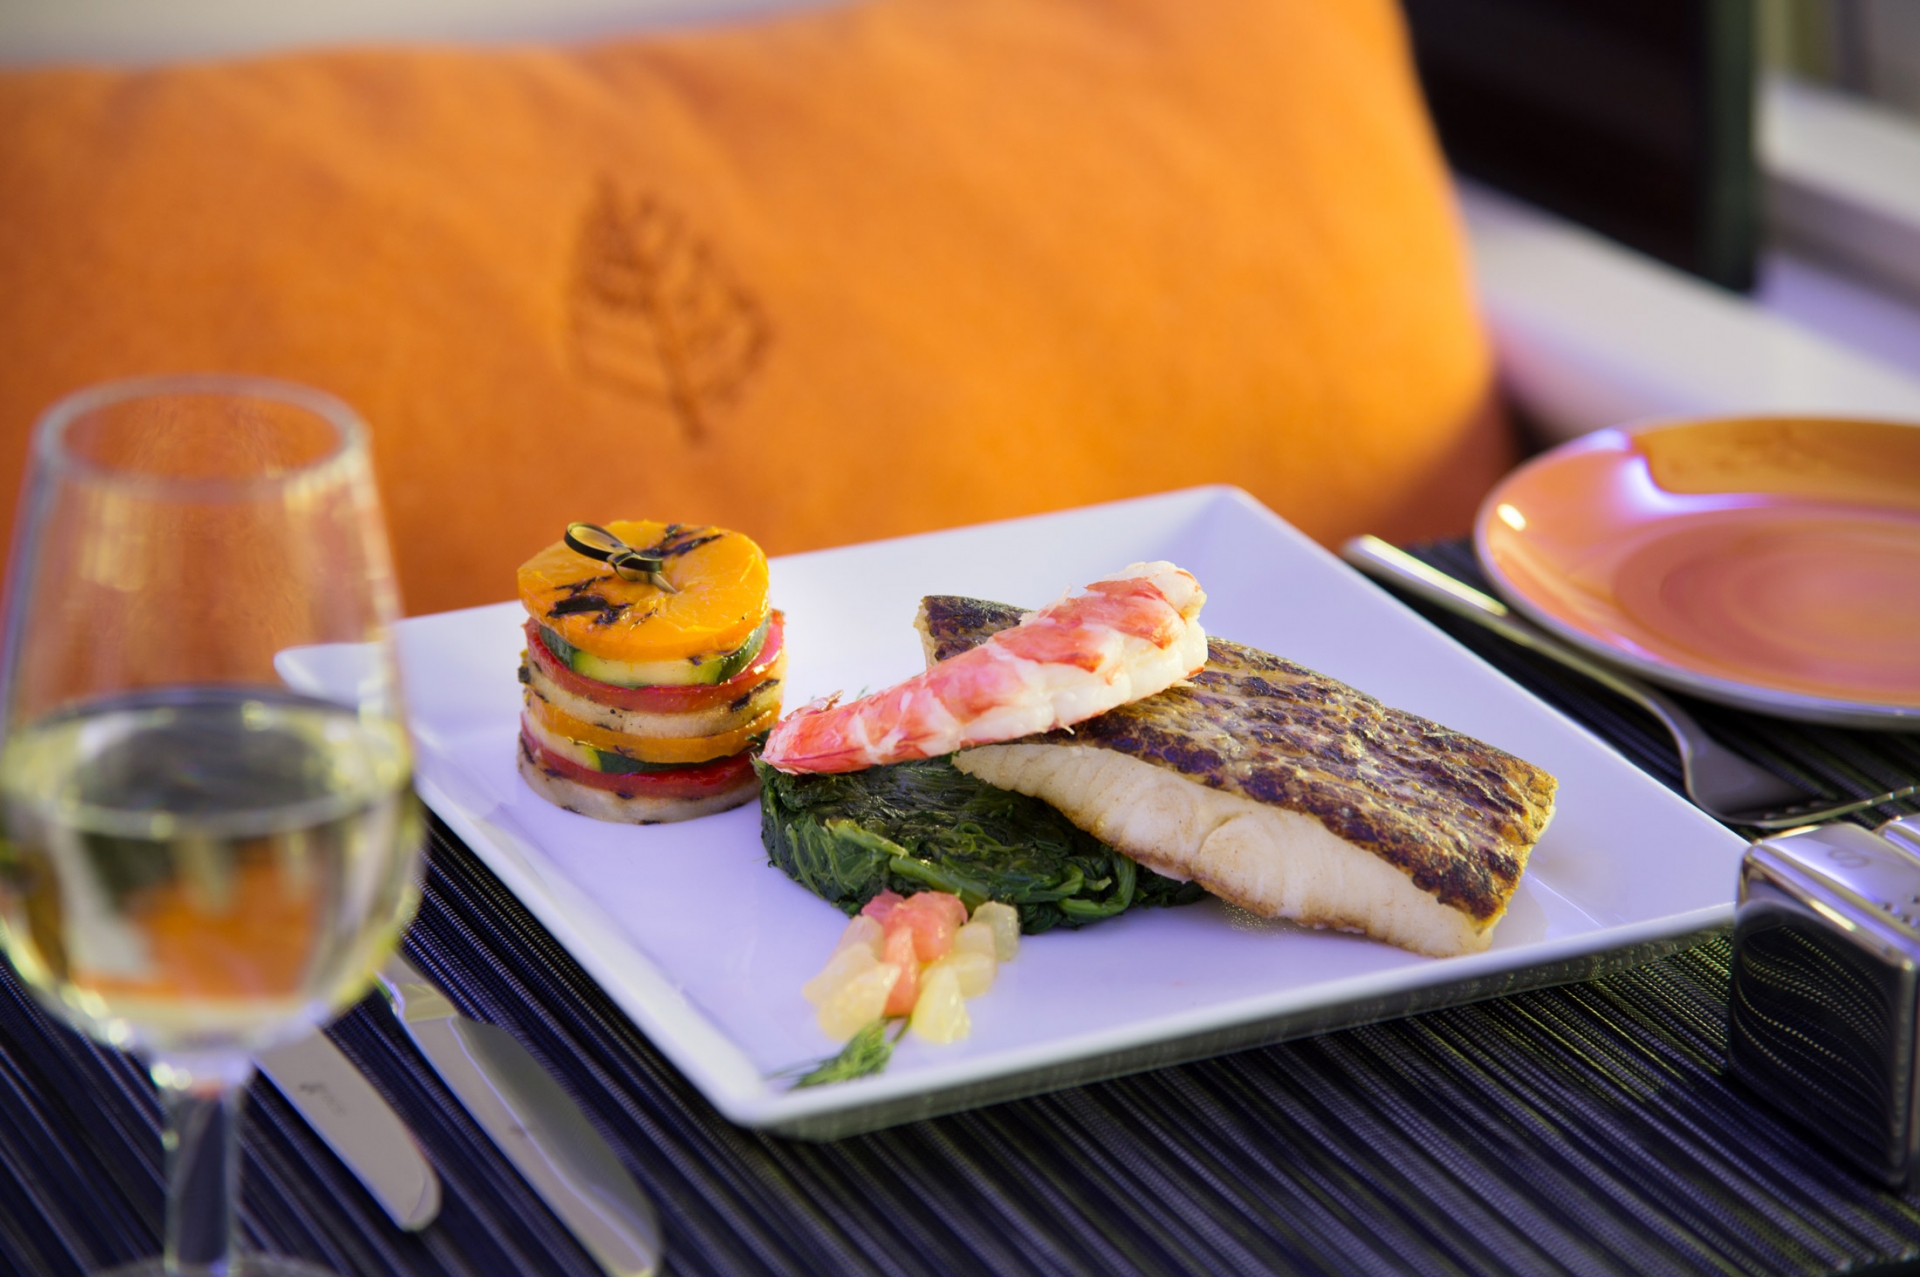 Meals on the flight are specially created by Four Seasons executive chefs and use only the freshest ingredients